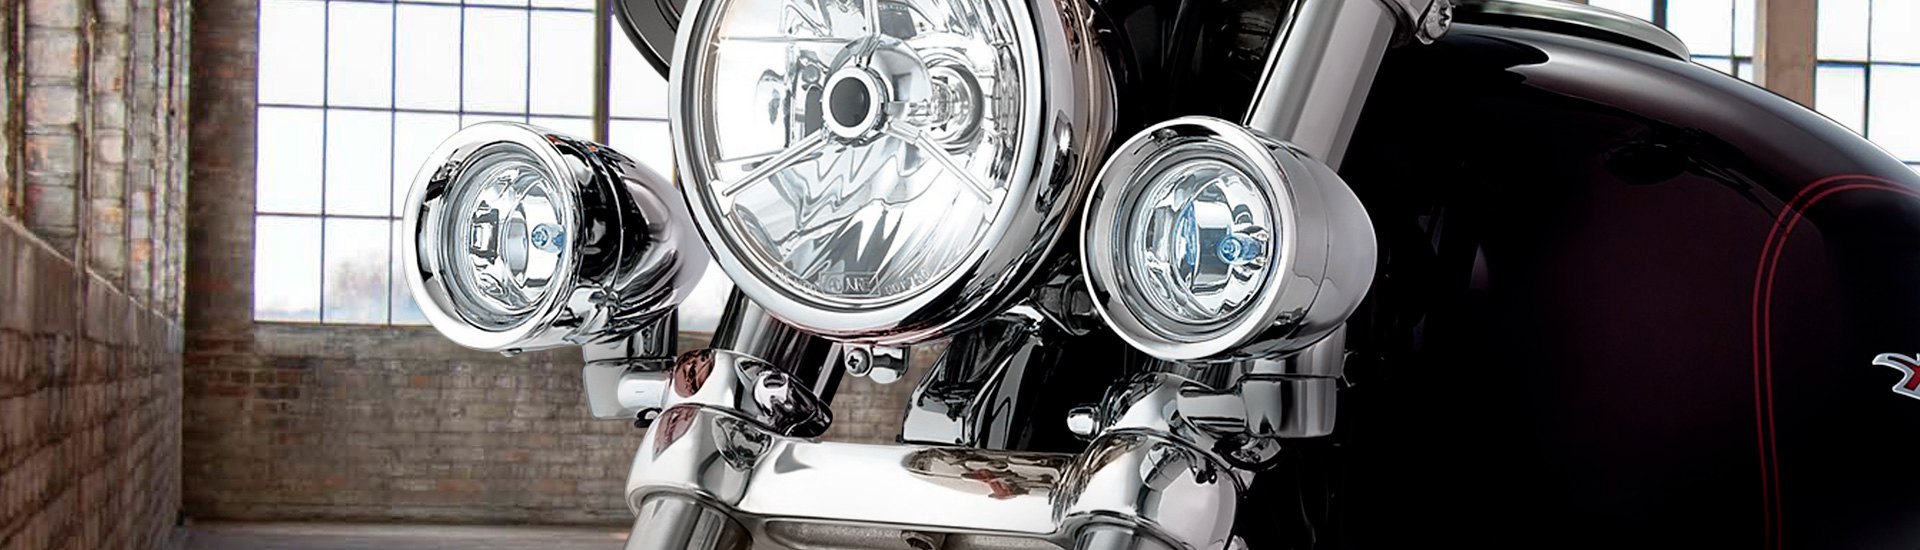 Harley Davidson Motorcycle Auxiliary Lights | LED, Driving, Fog